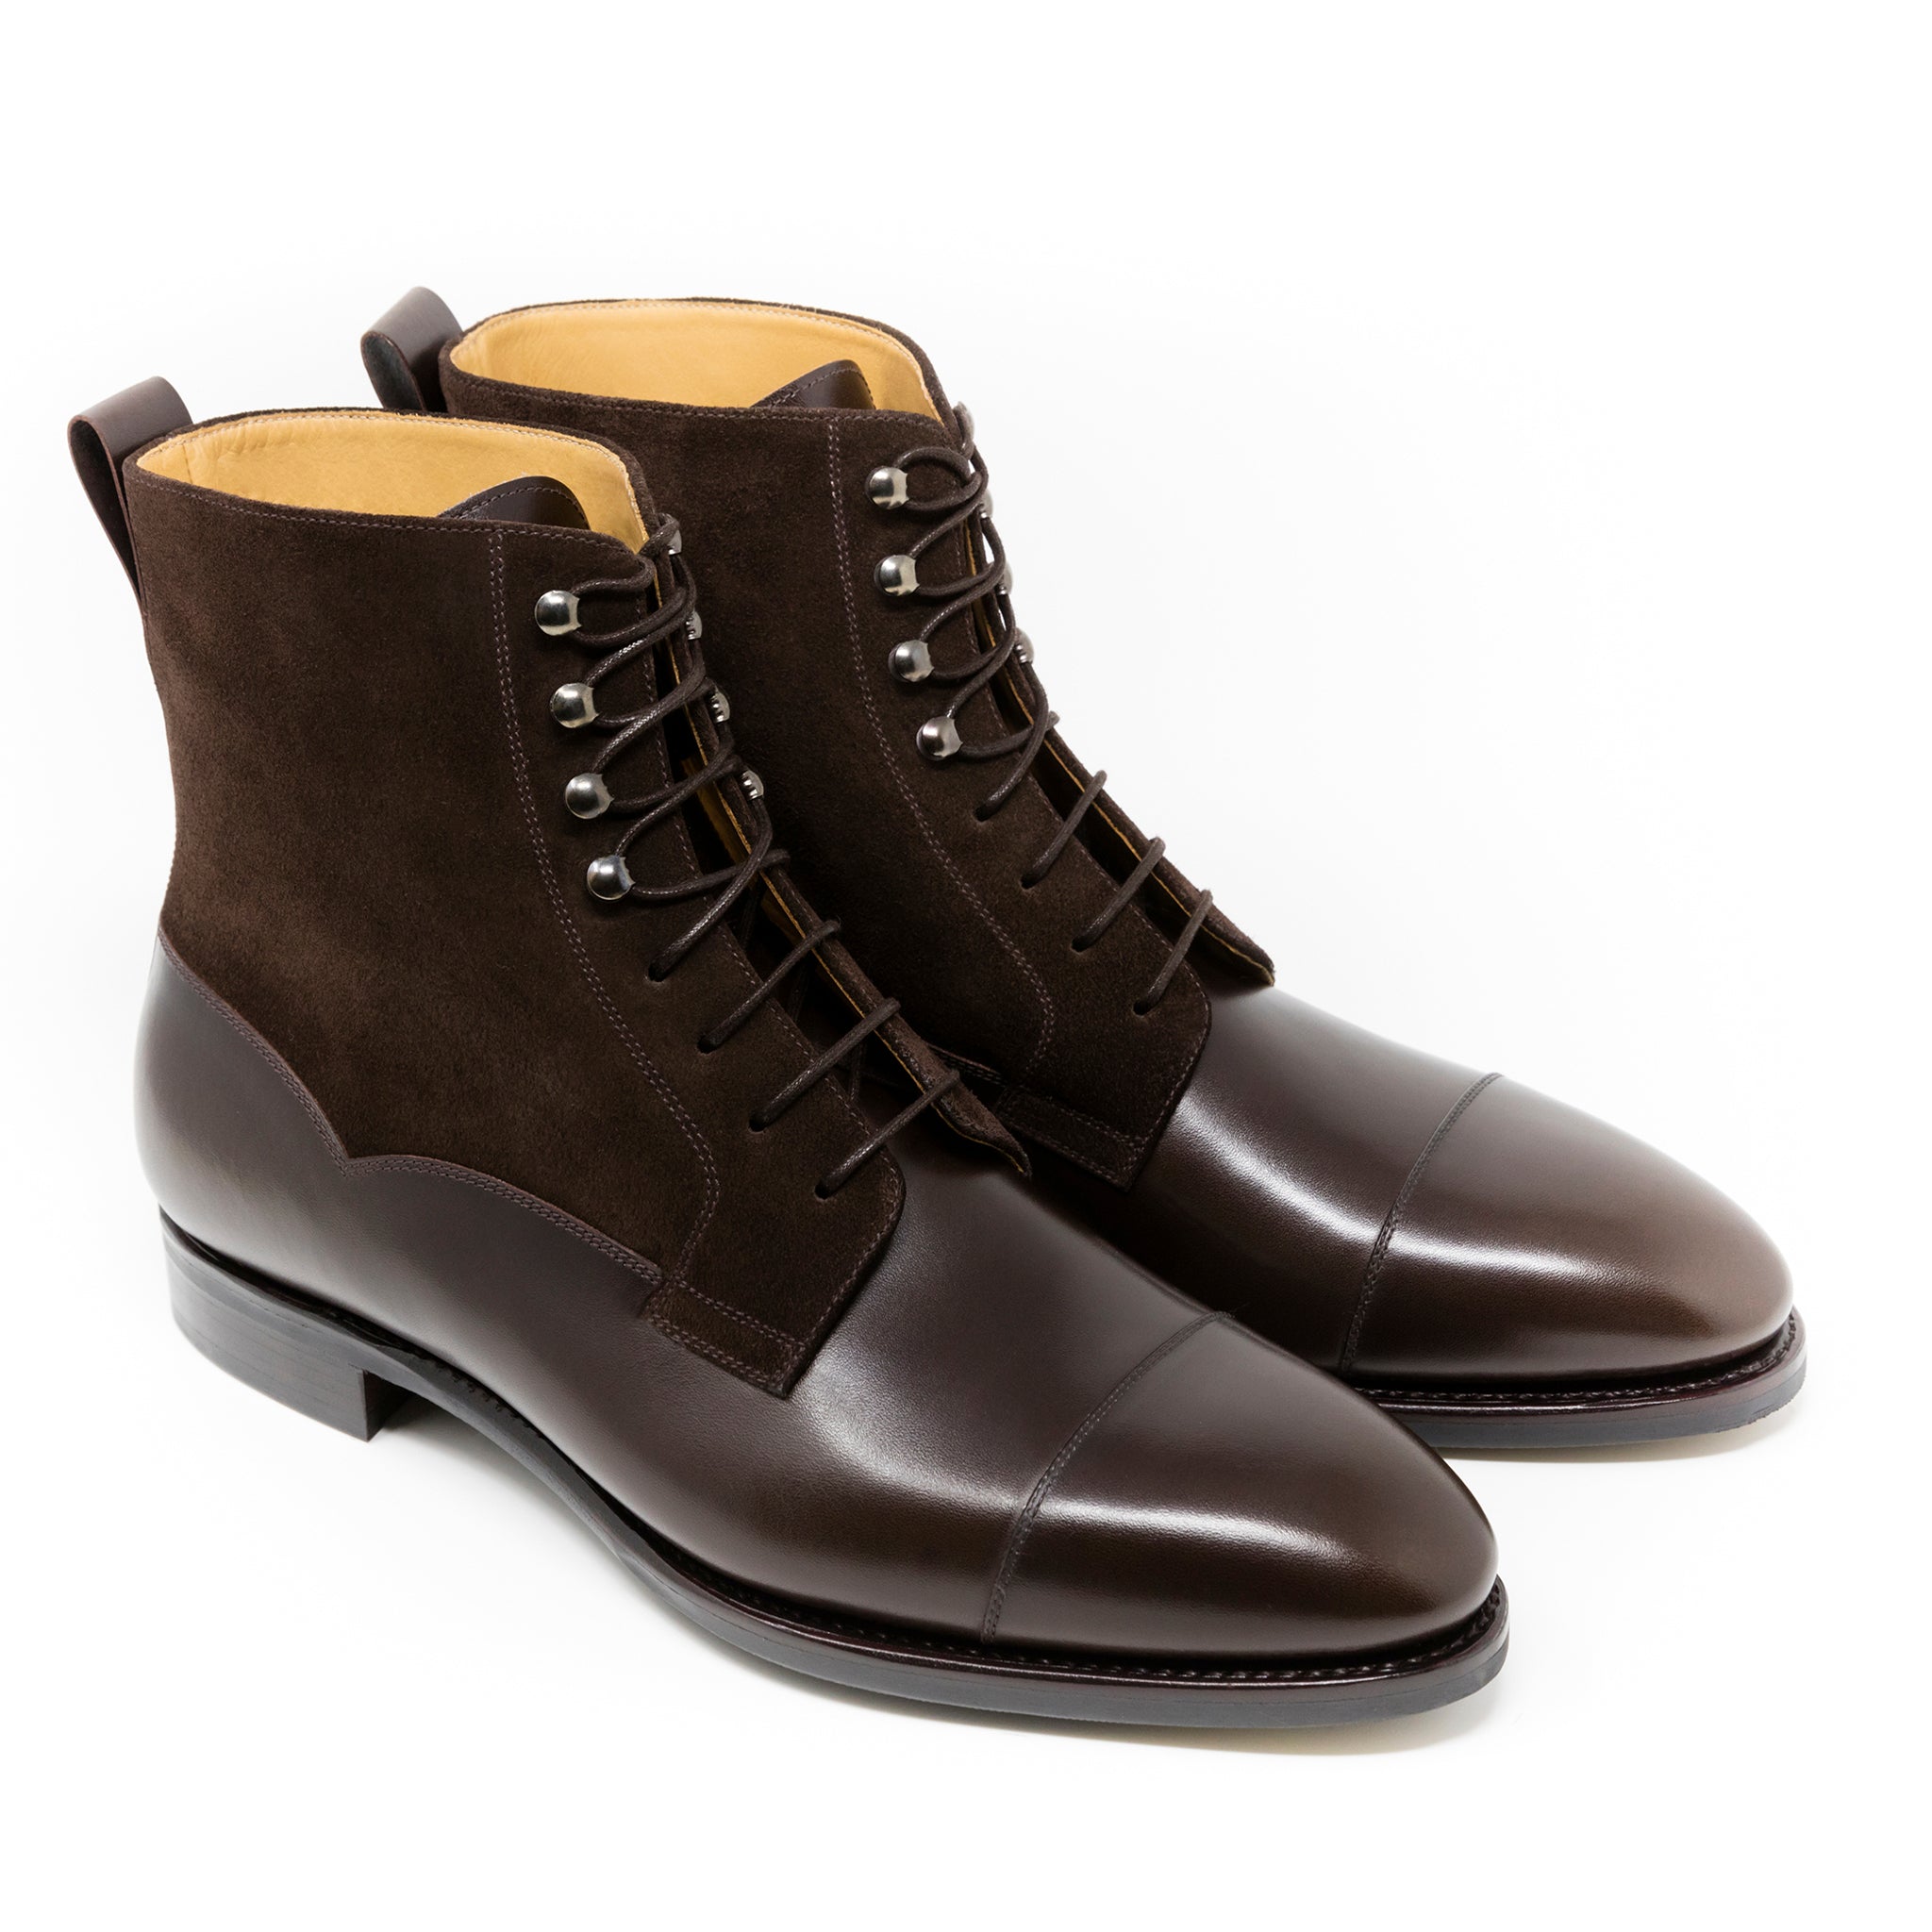 TLB Mallorca | Men's Boots made of leather | Men's Shoes Artista ...